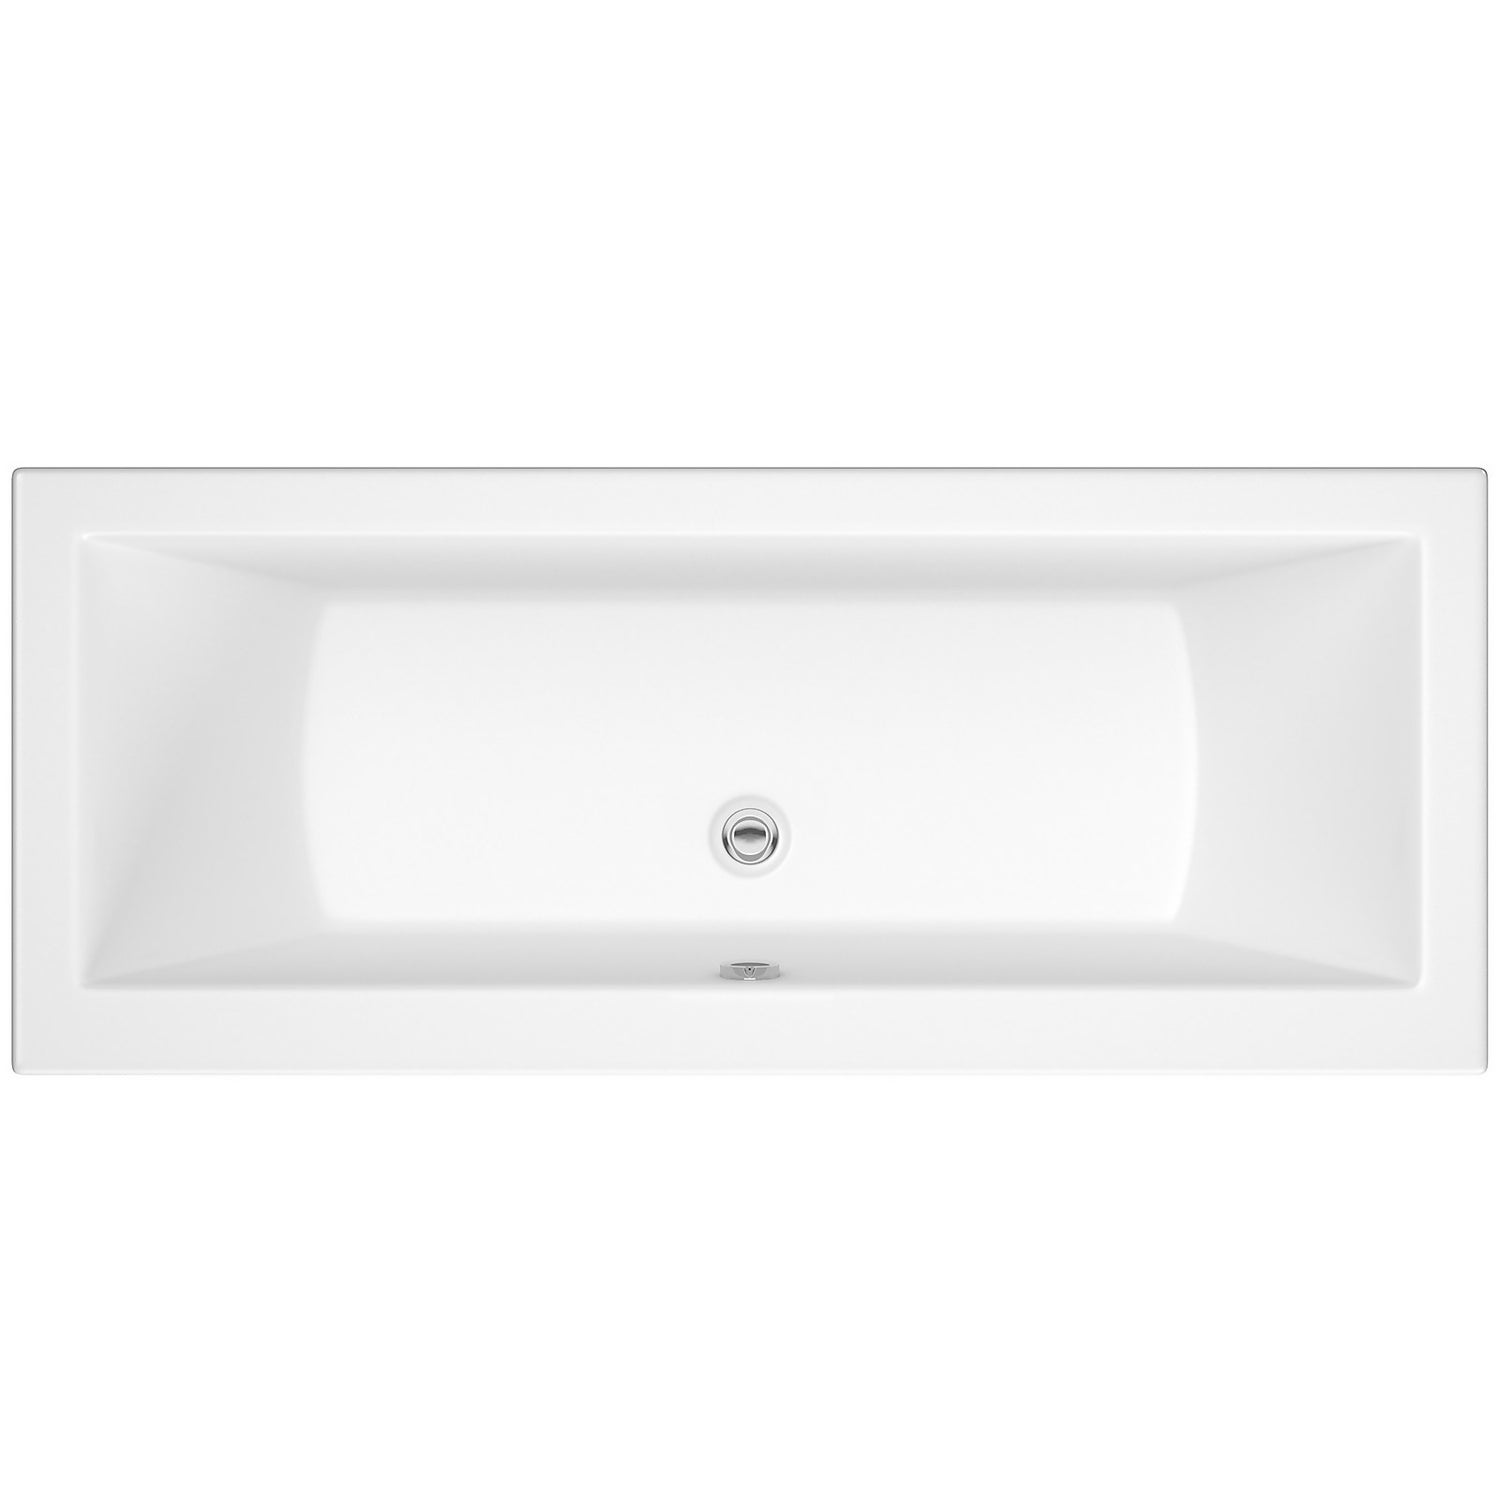 Madeira White Premiercast Double Ended Straight Bath - 1800 x 800mm